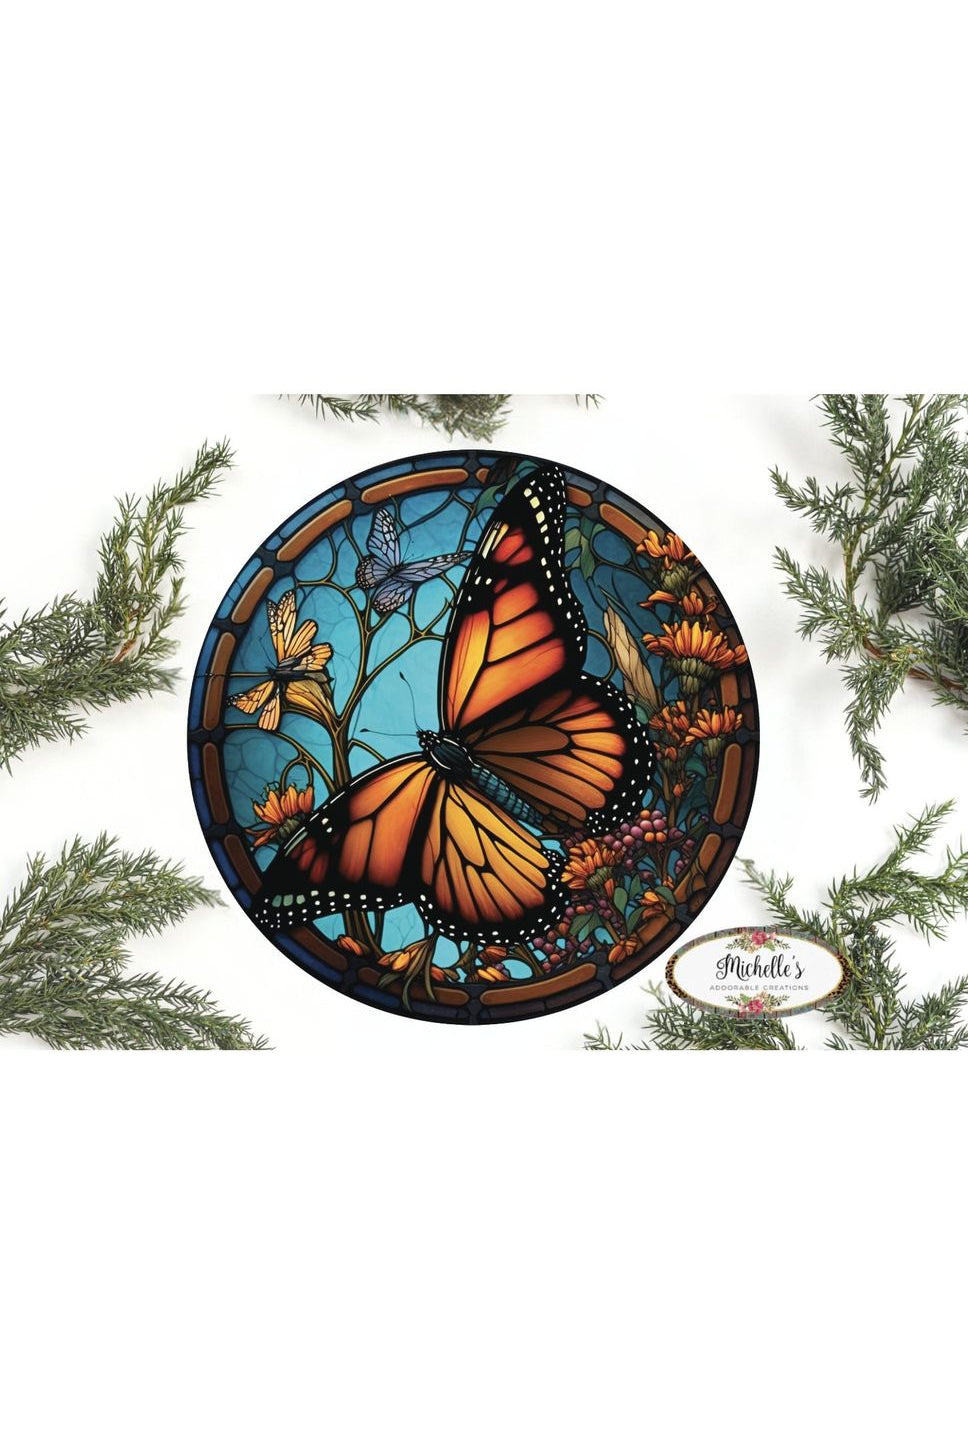 Shop For Monarch Faux Stained Glass Butterfly Sign - Wreath Enhancement